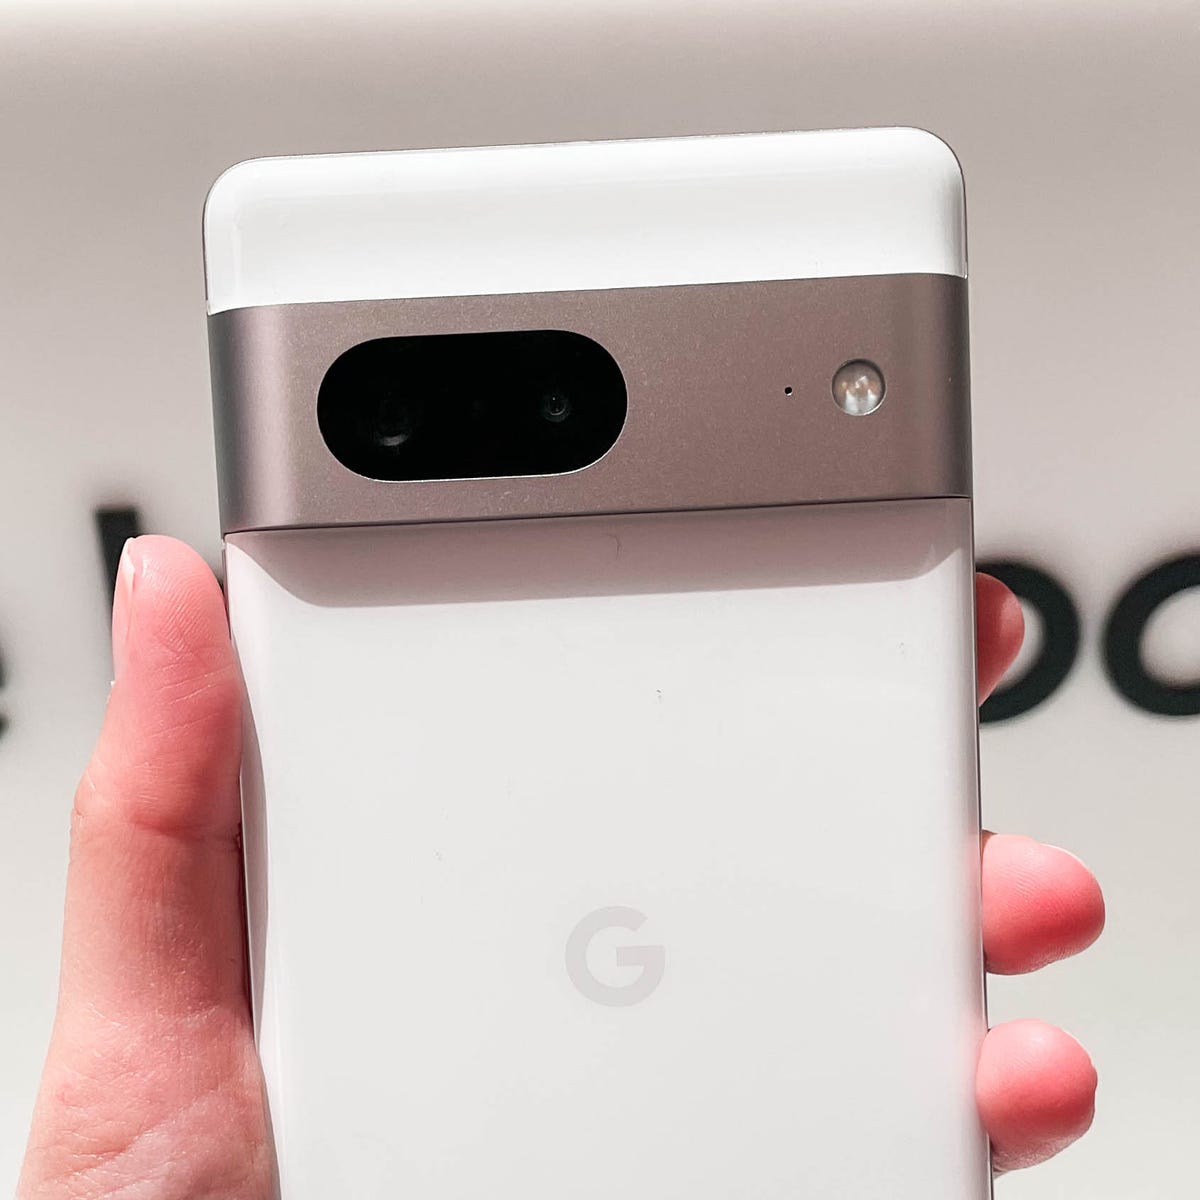 Google Pixel 7 Hands-On: $599 Flagship Brings New Photo-Editing